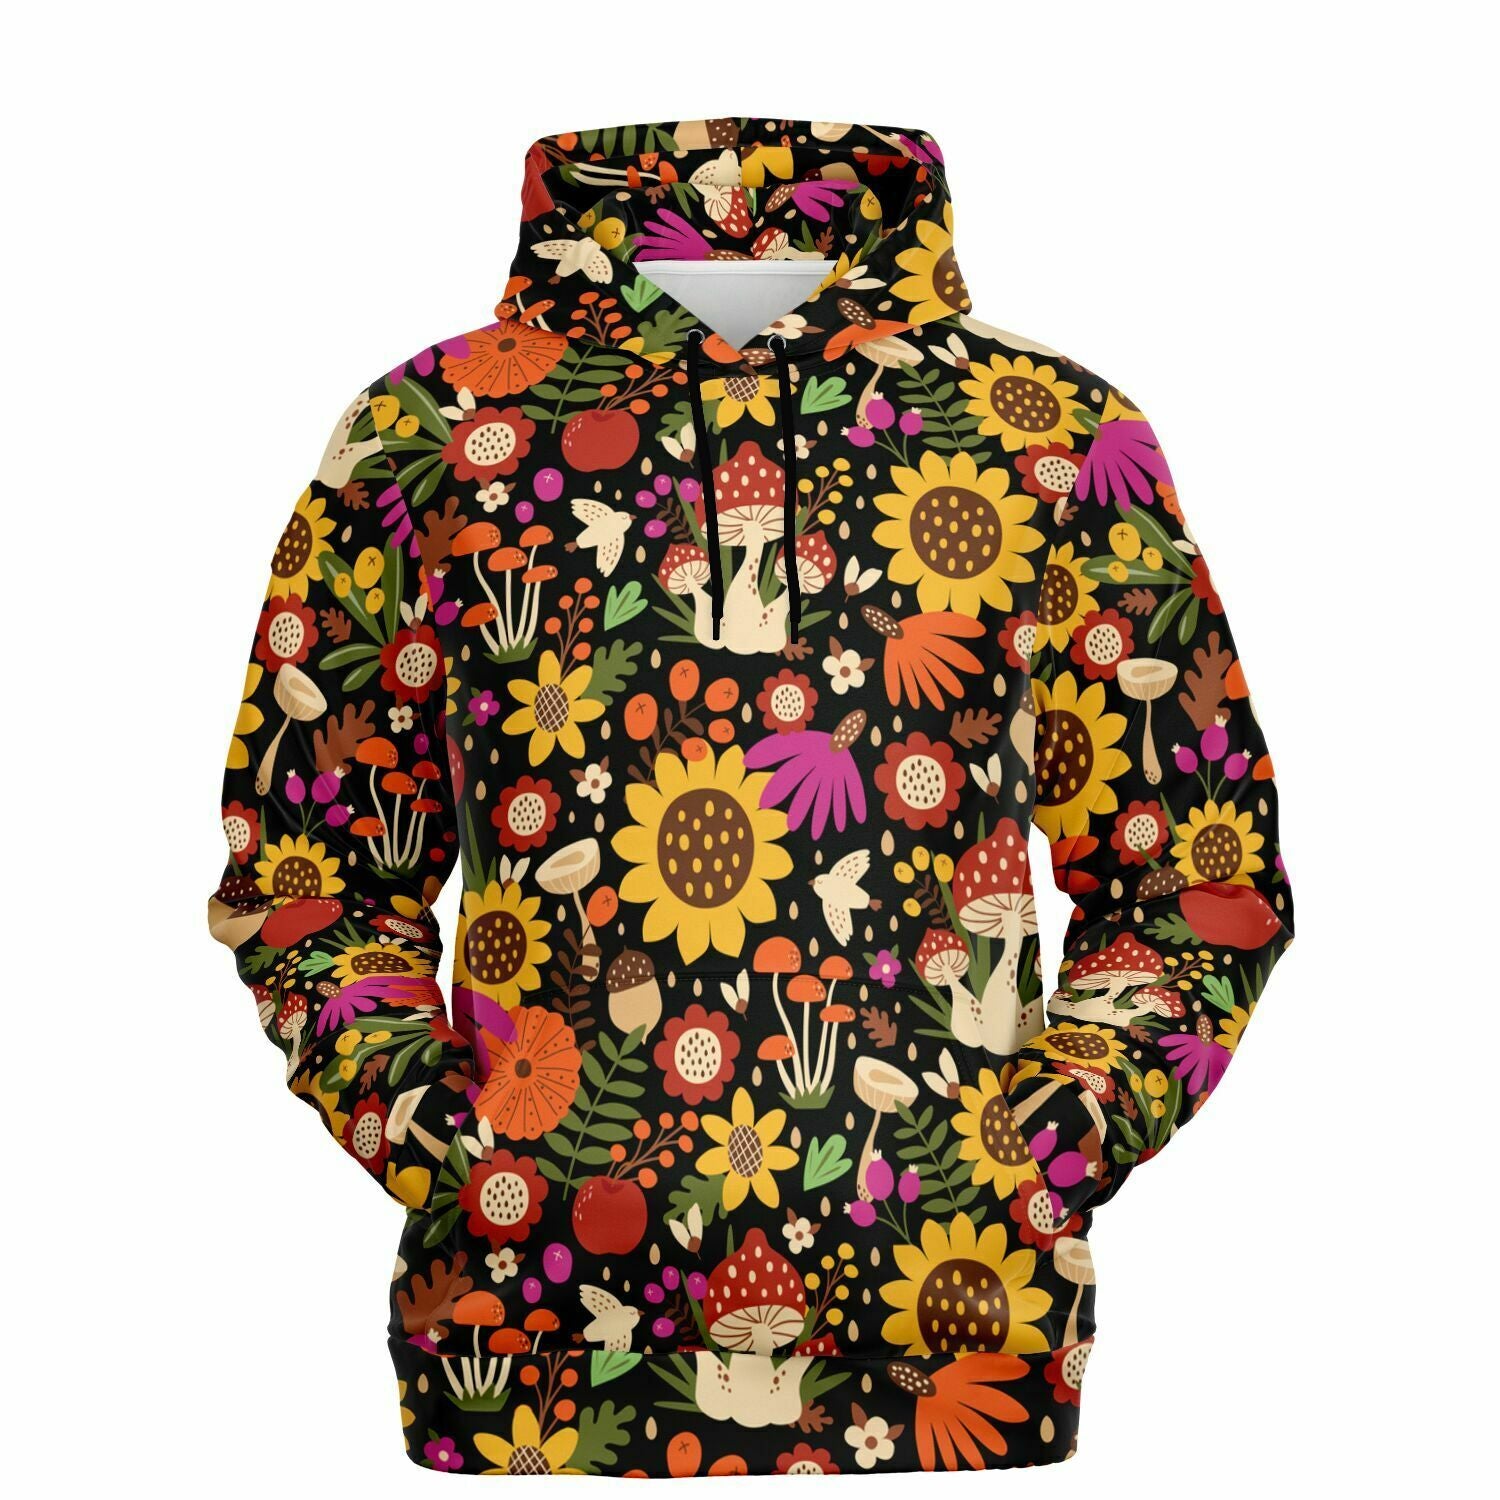 Mushroom Hoodie, Sunflower Floral Birds Pullover Men Women Adult Aesthetic Graphic Cotton Hooded Sweatshirt with Pockets Starcove Fashion